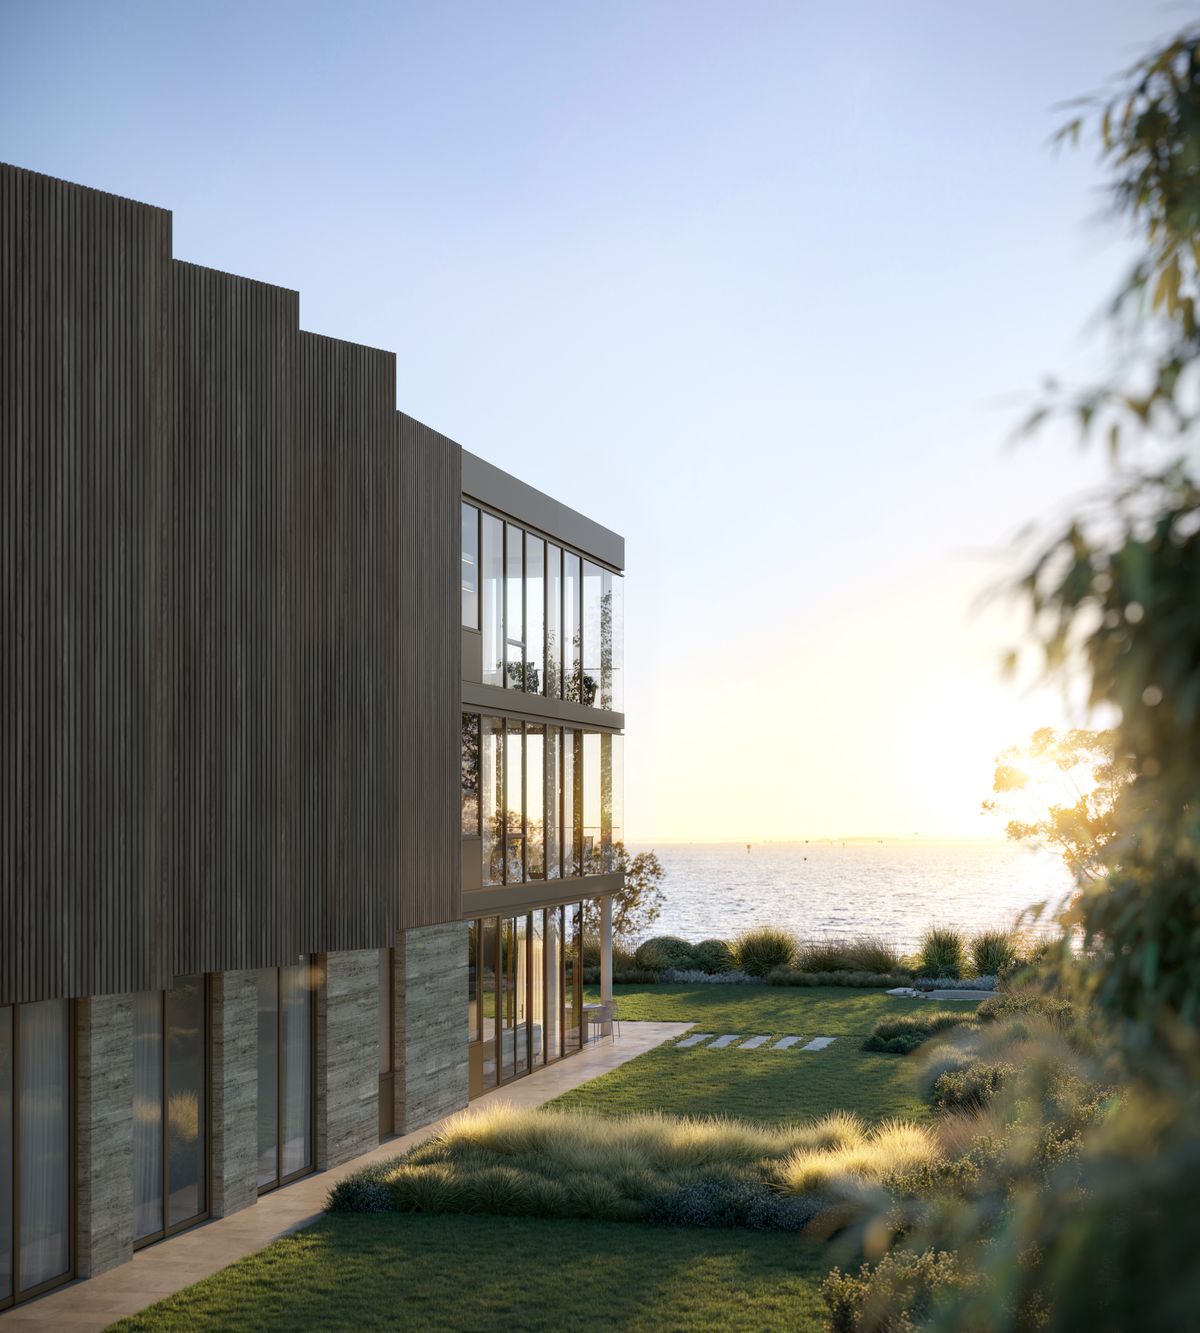 Stella Maris: Nautica House by MONNO. View from Nautica house out to Corio Bay